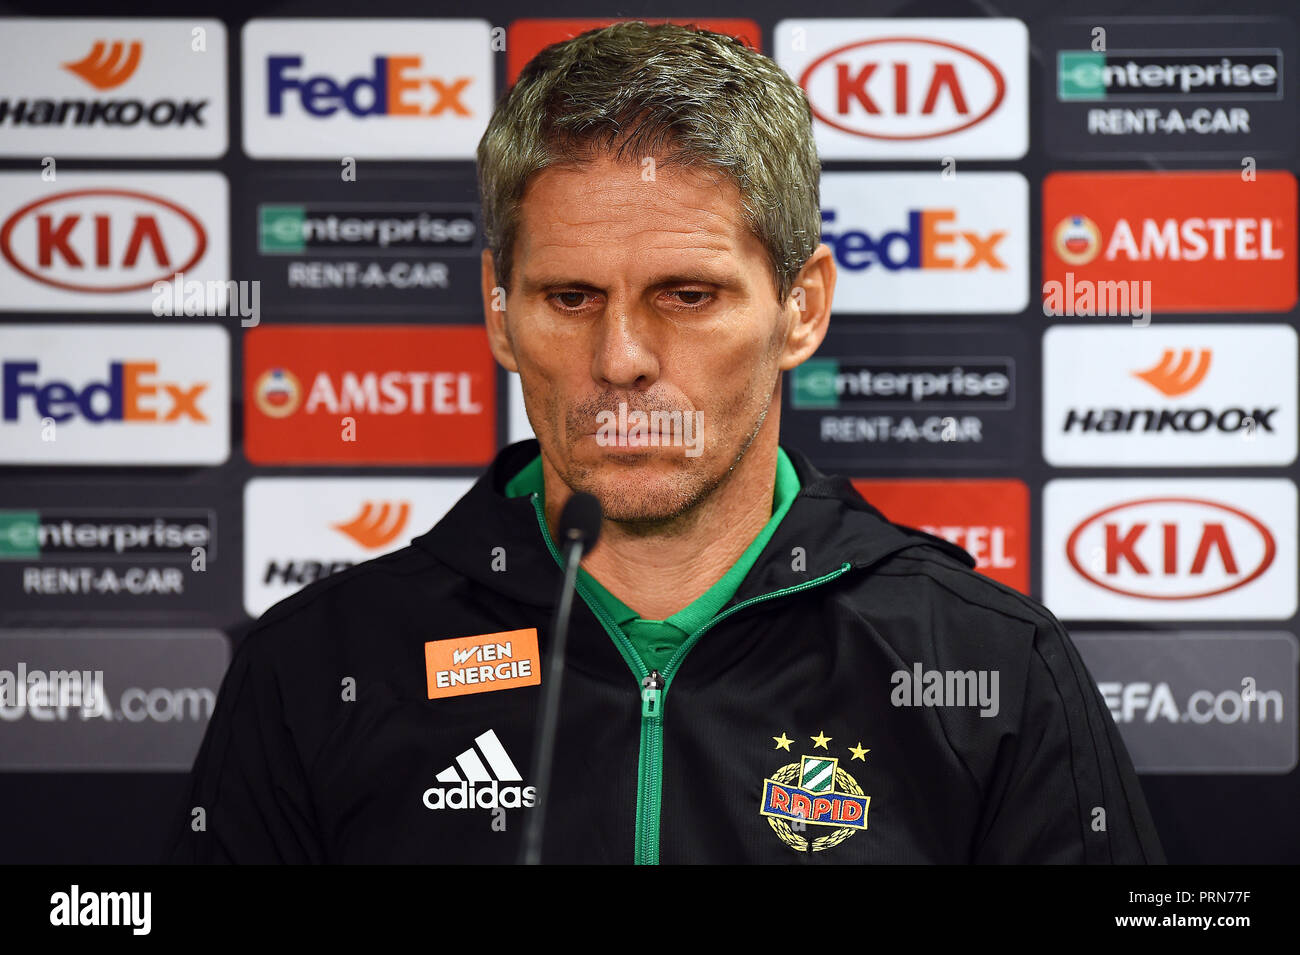 Glasgow, Scotland. Wednesday 3rd October 2018.   Rapid Wein manager Dietmar Kühbauer addresses the media at a press conference ahead of their Europa League Matchday 2 match against Glasgow Rangers at Ibrox Stadium, Glasgow, Scotland on Wednesday 3rd October 2018 2018.   Picture Andy Buchanan Credit: Andy Buchanan/Alamy Live News Stock Photo